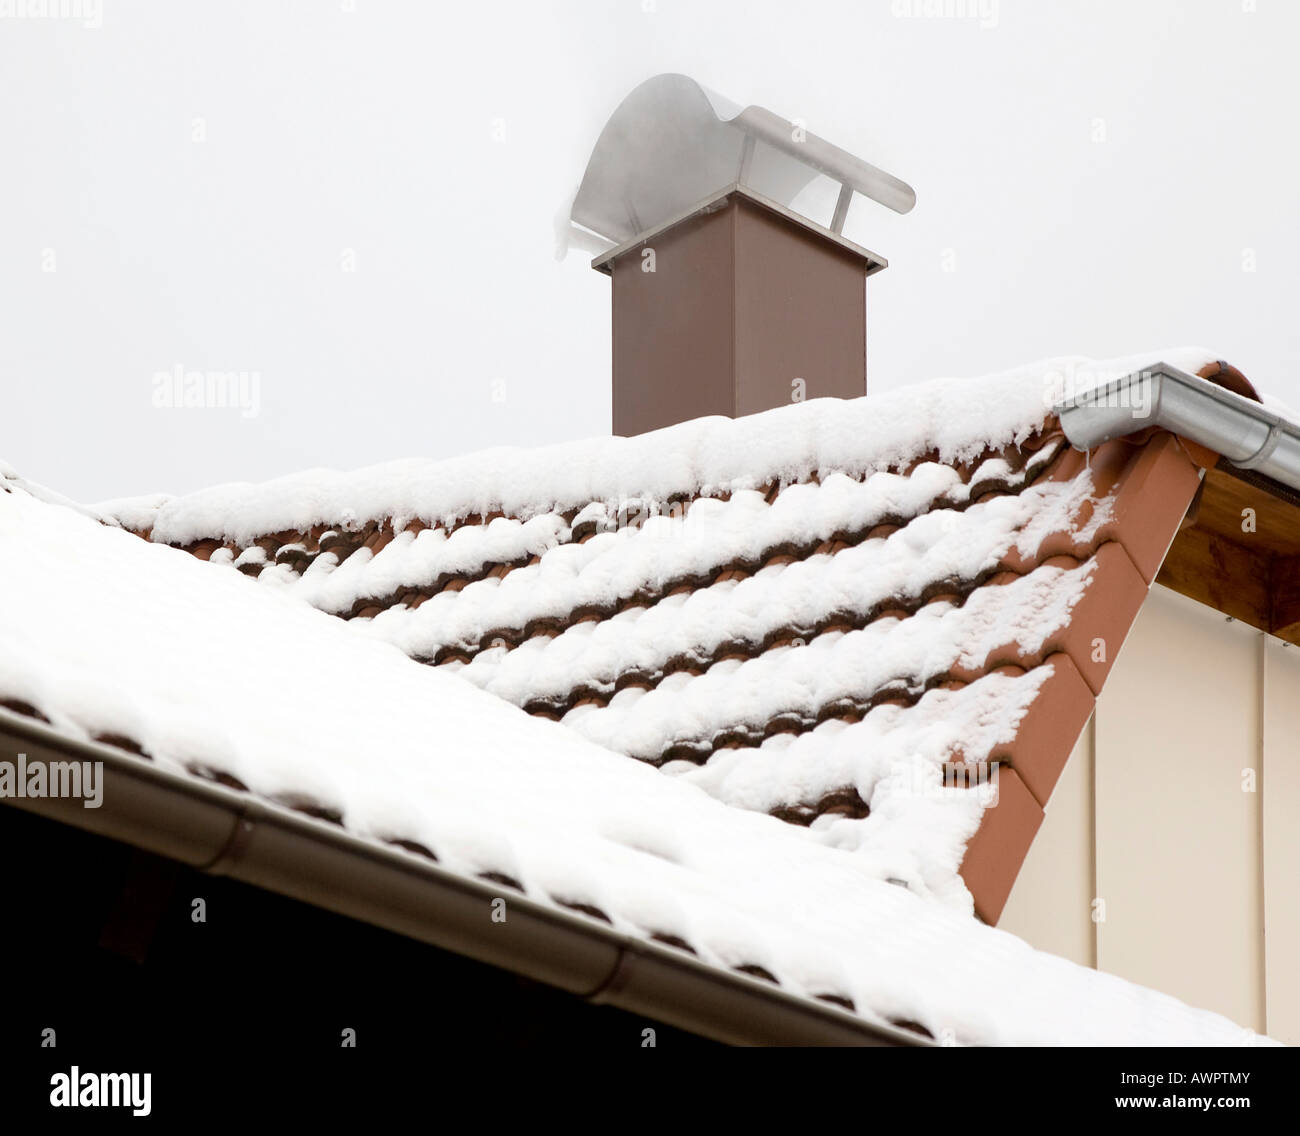 A snow covered roof with a smoking chimney Stock Photo